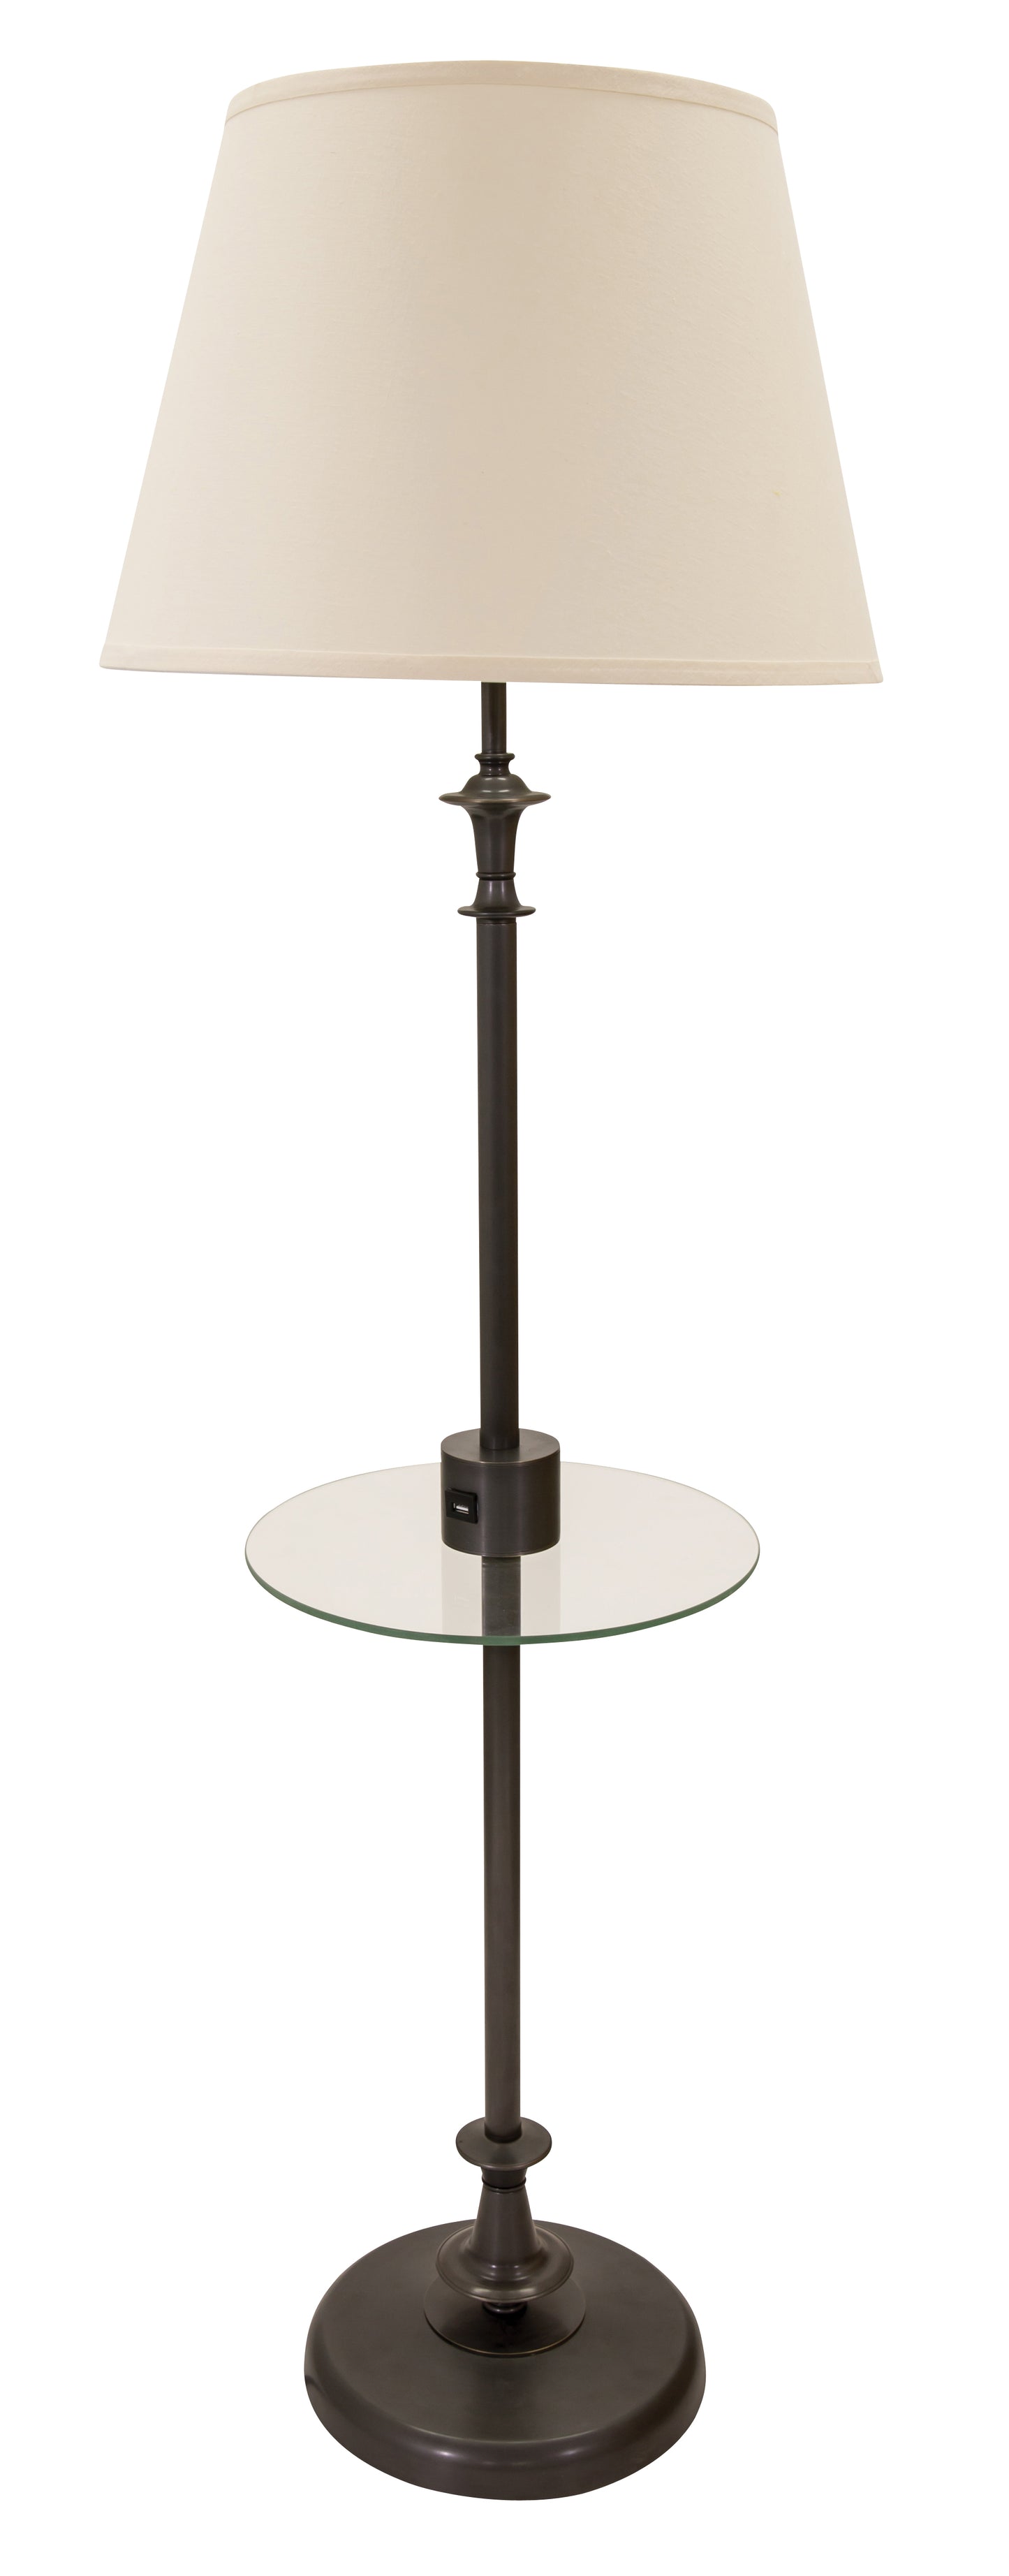 House of Troy Randolph Floor Lamp with Table and USB Port in Oil Rubbed Bronze RA302-OB